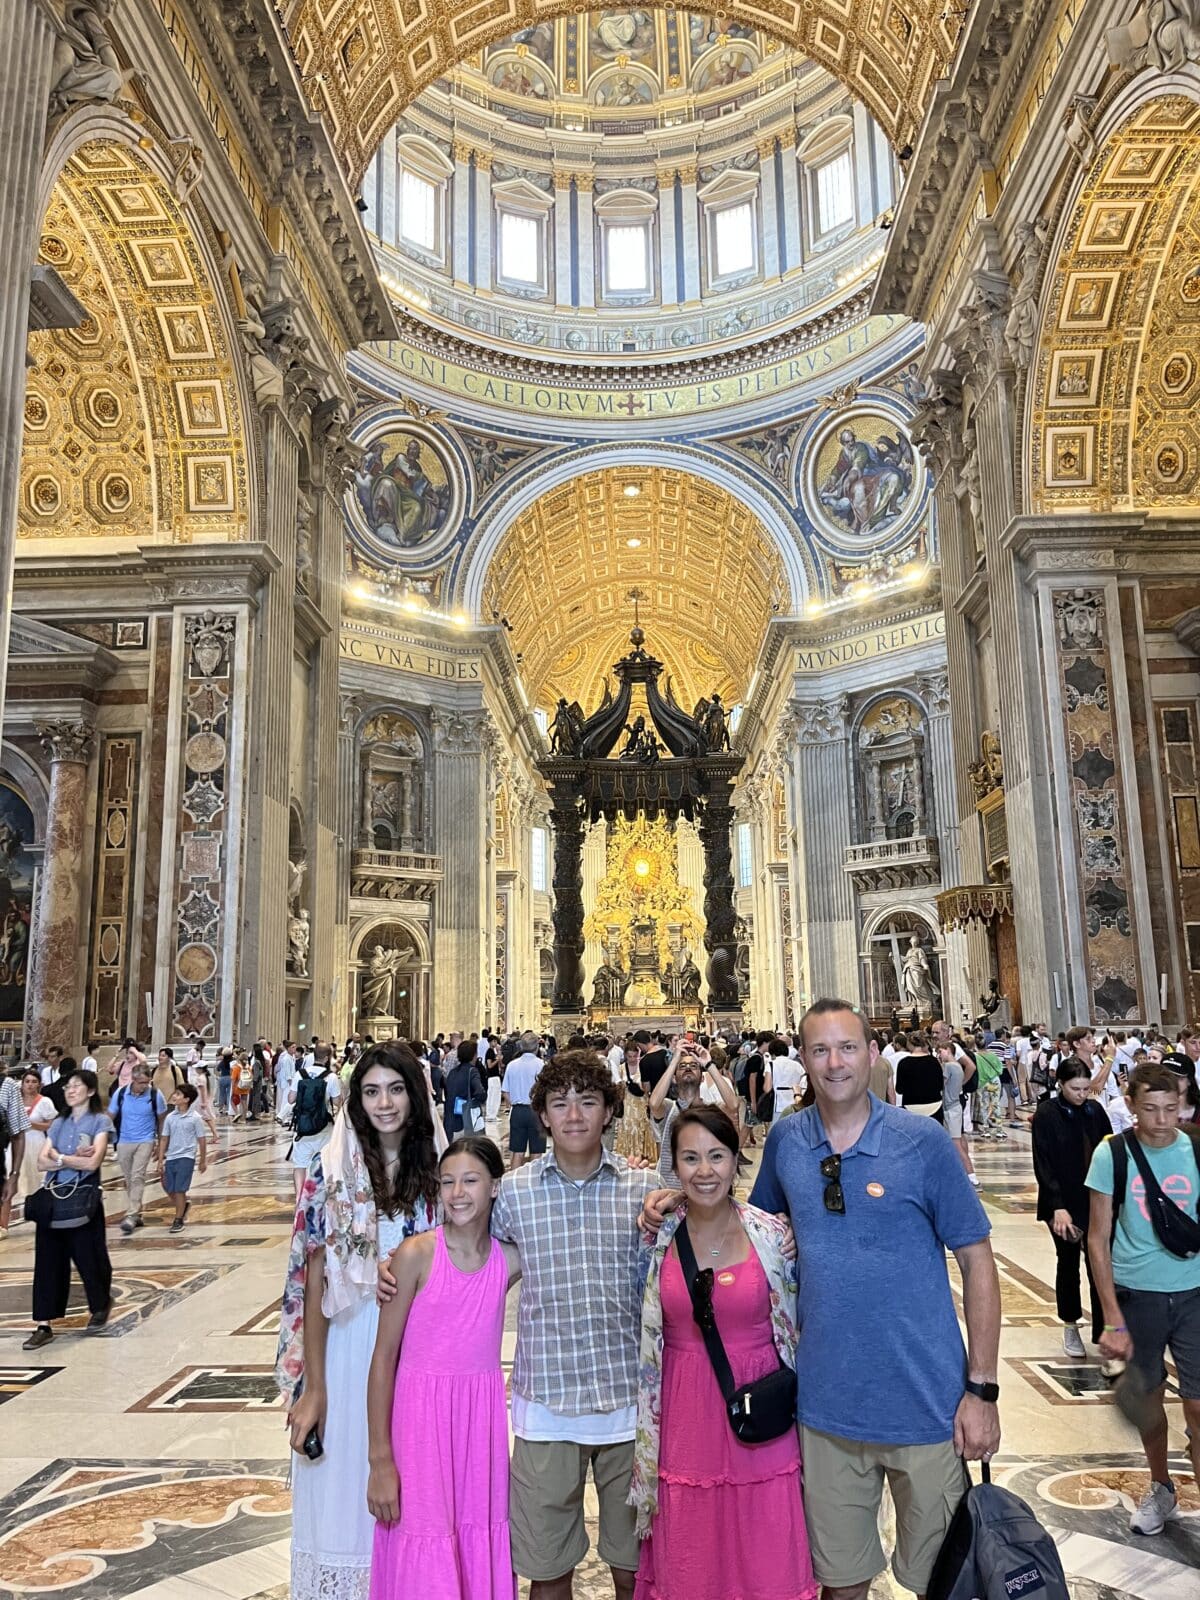 Family picture at St. Peter's Basilica in Rome.